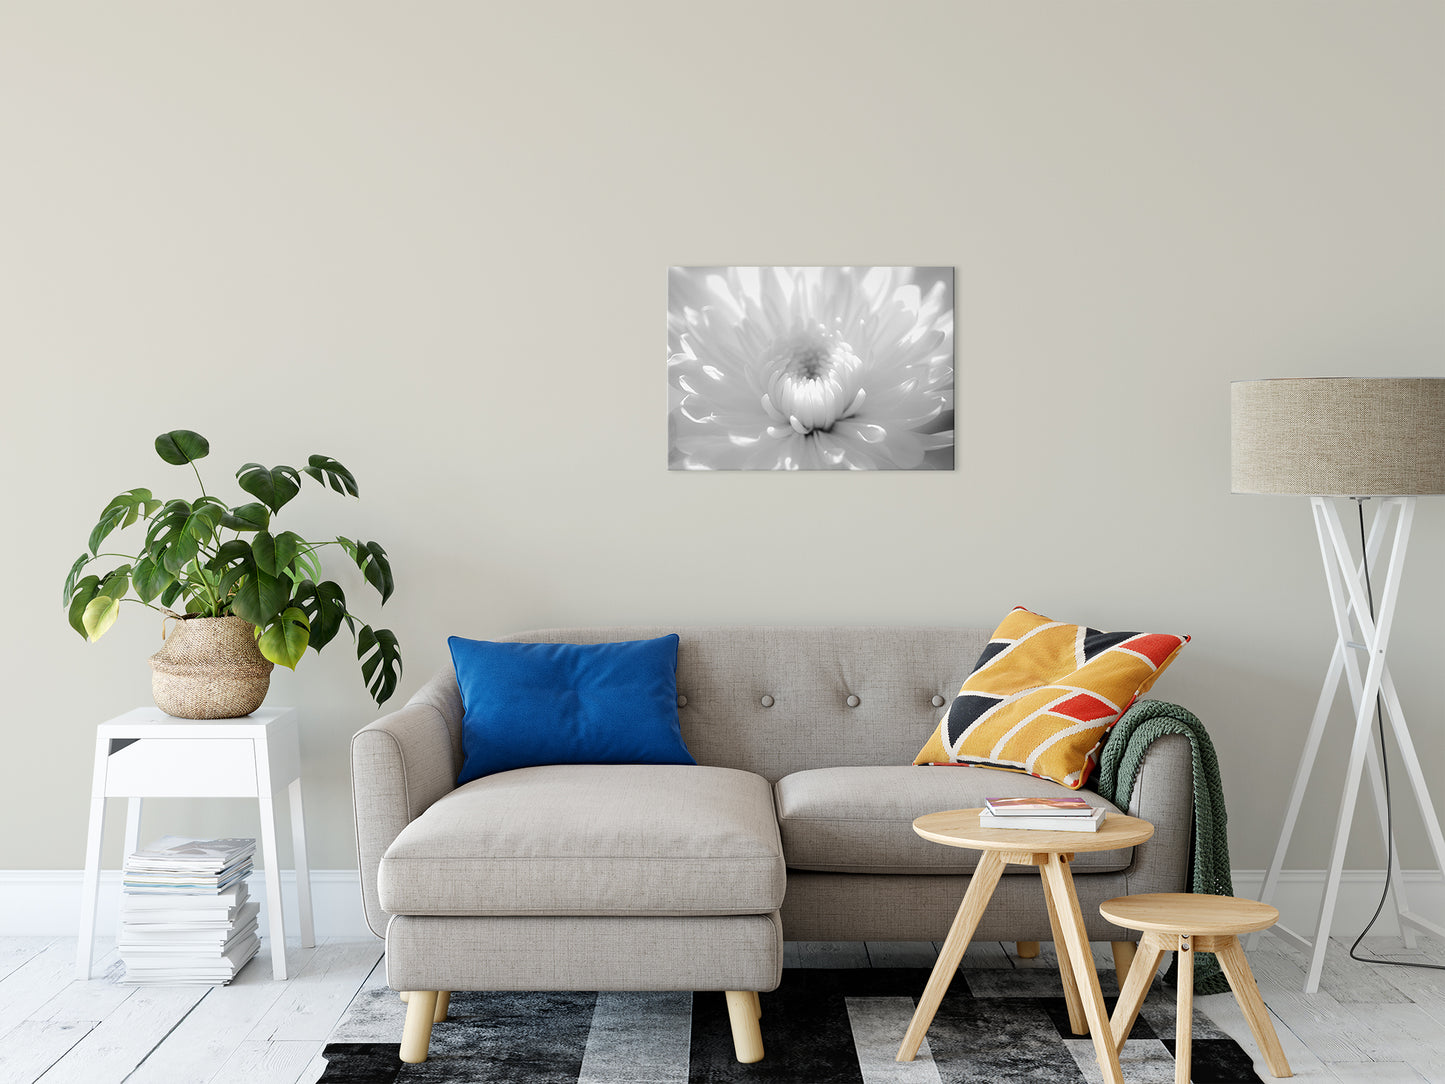 Infrared Flower 2 Nature / Floral Photo Fine Art Canvas Wall Art Prints 20" x 30" - PIPAFINEART